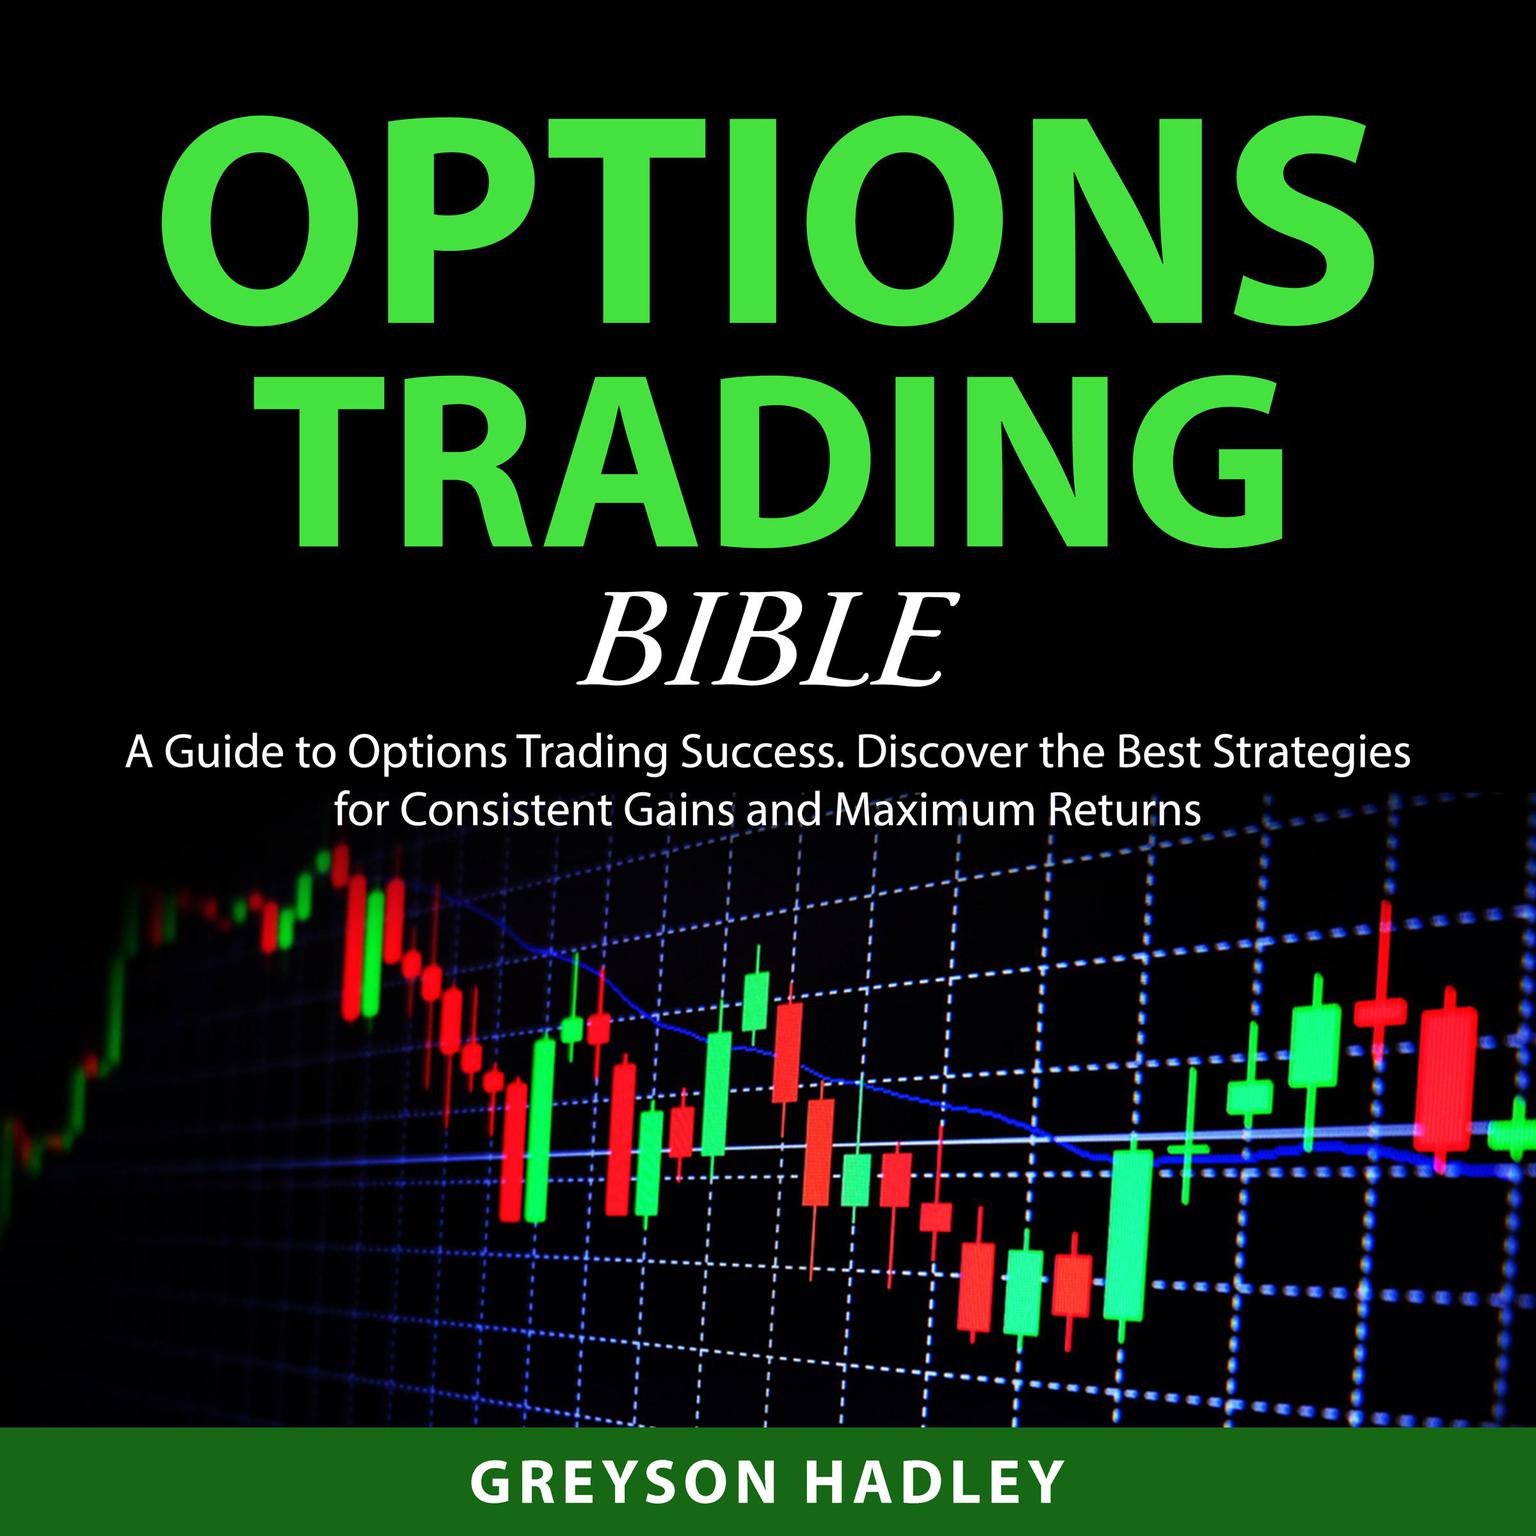 Options Trading Bible Audiobook, by Greyson Hadley